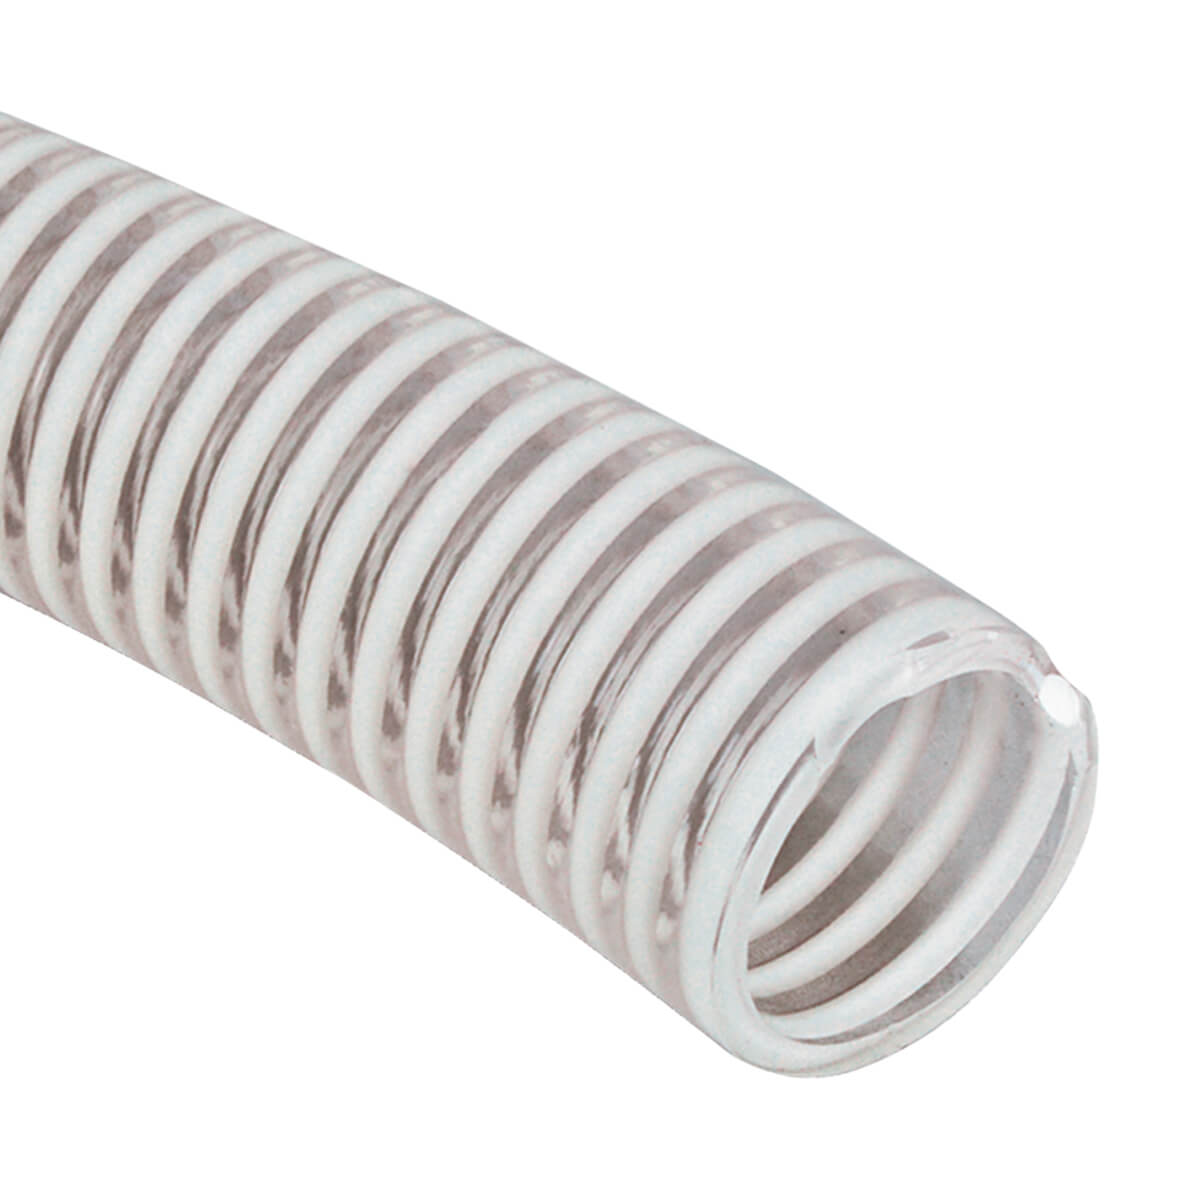 Clear PVC Suction Hose — Bulk/Uncoupled - 1-in - Price Per ft